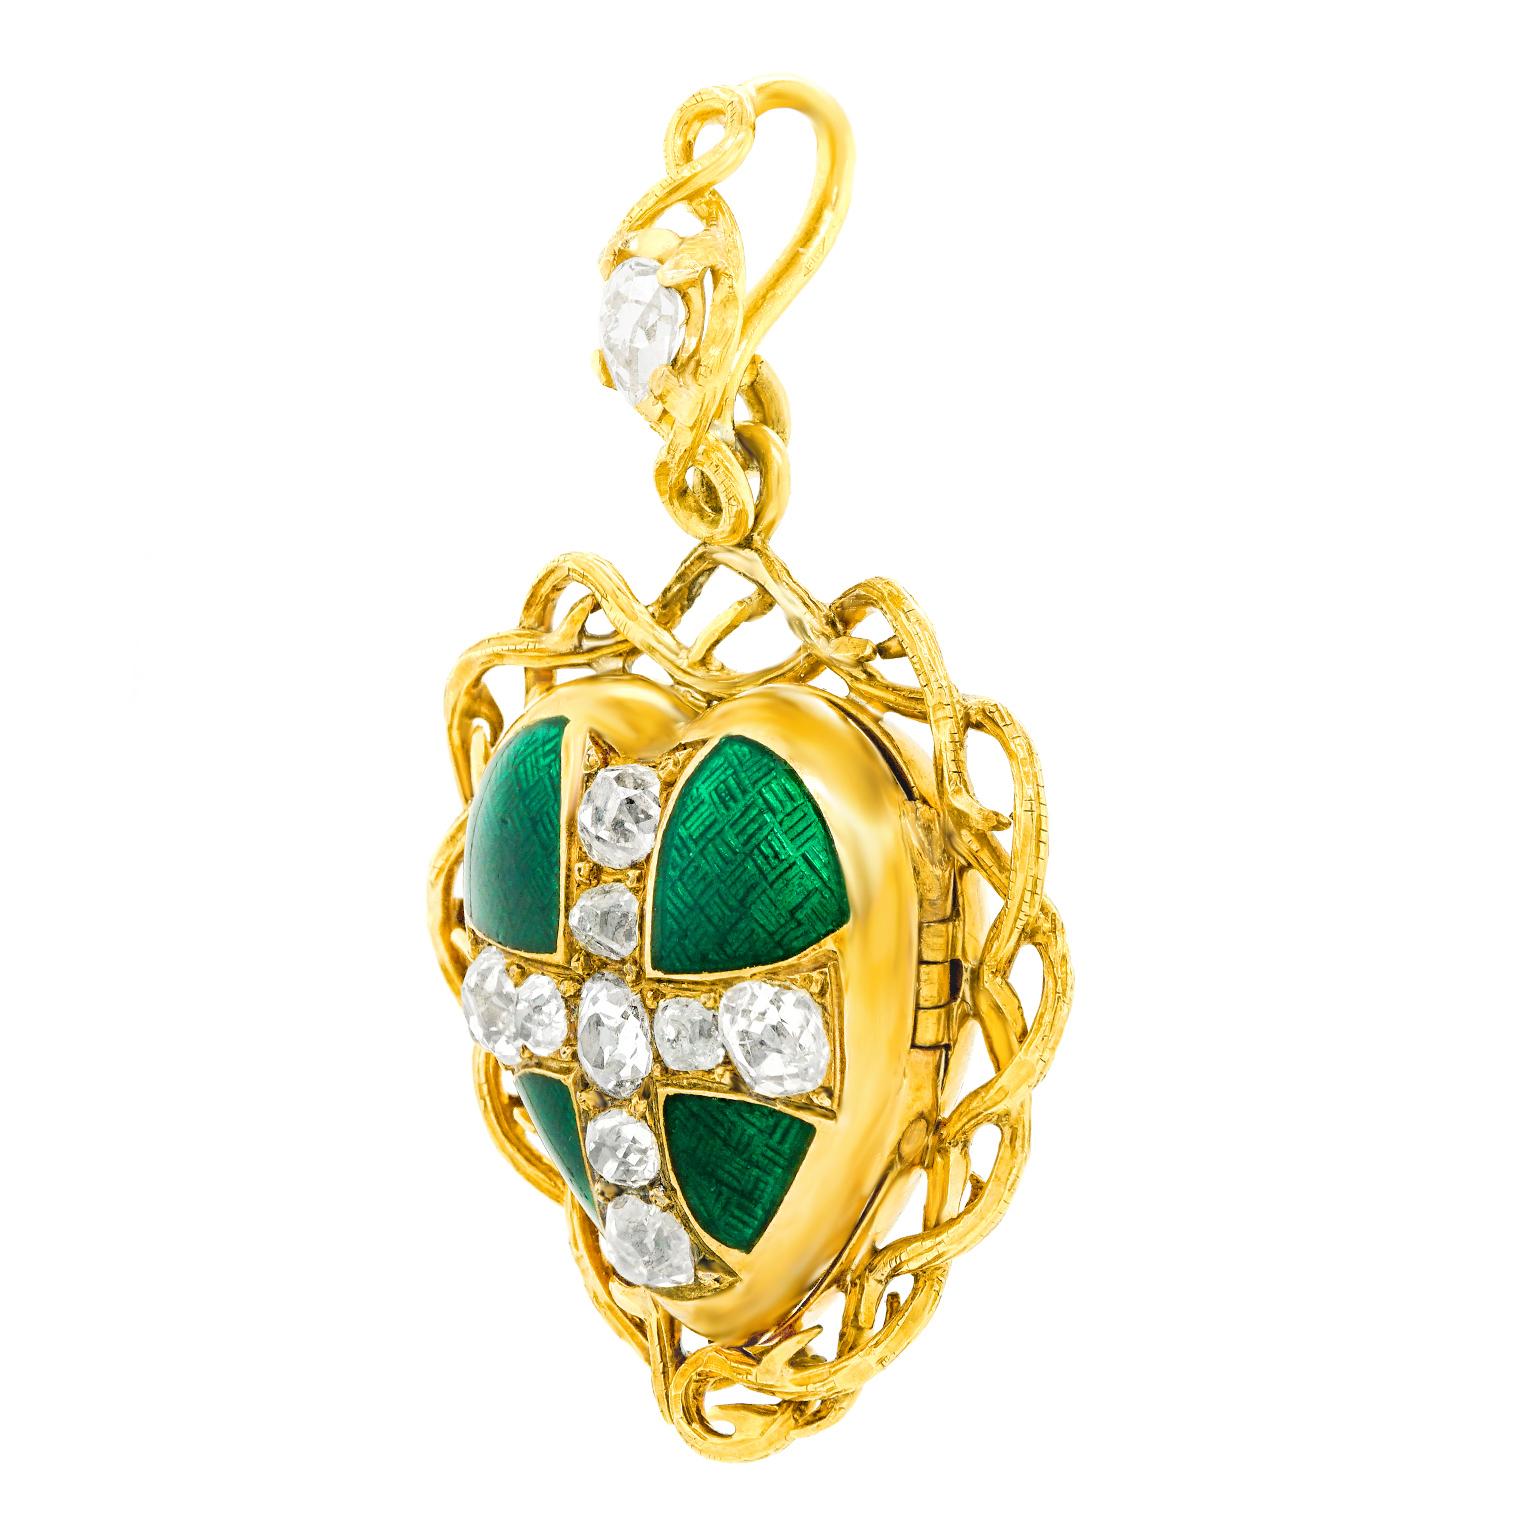 Victorian Gothic Revival Diamond and Enamel Gold Heart Pendant, French, 1870